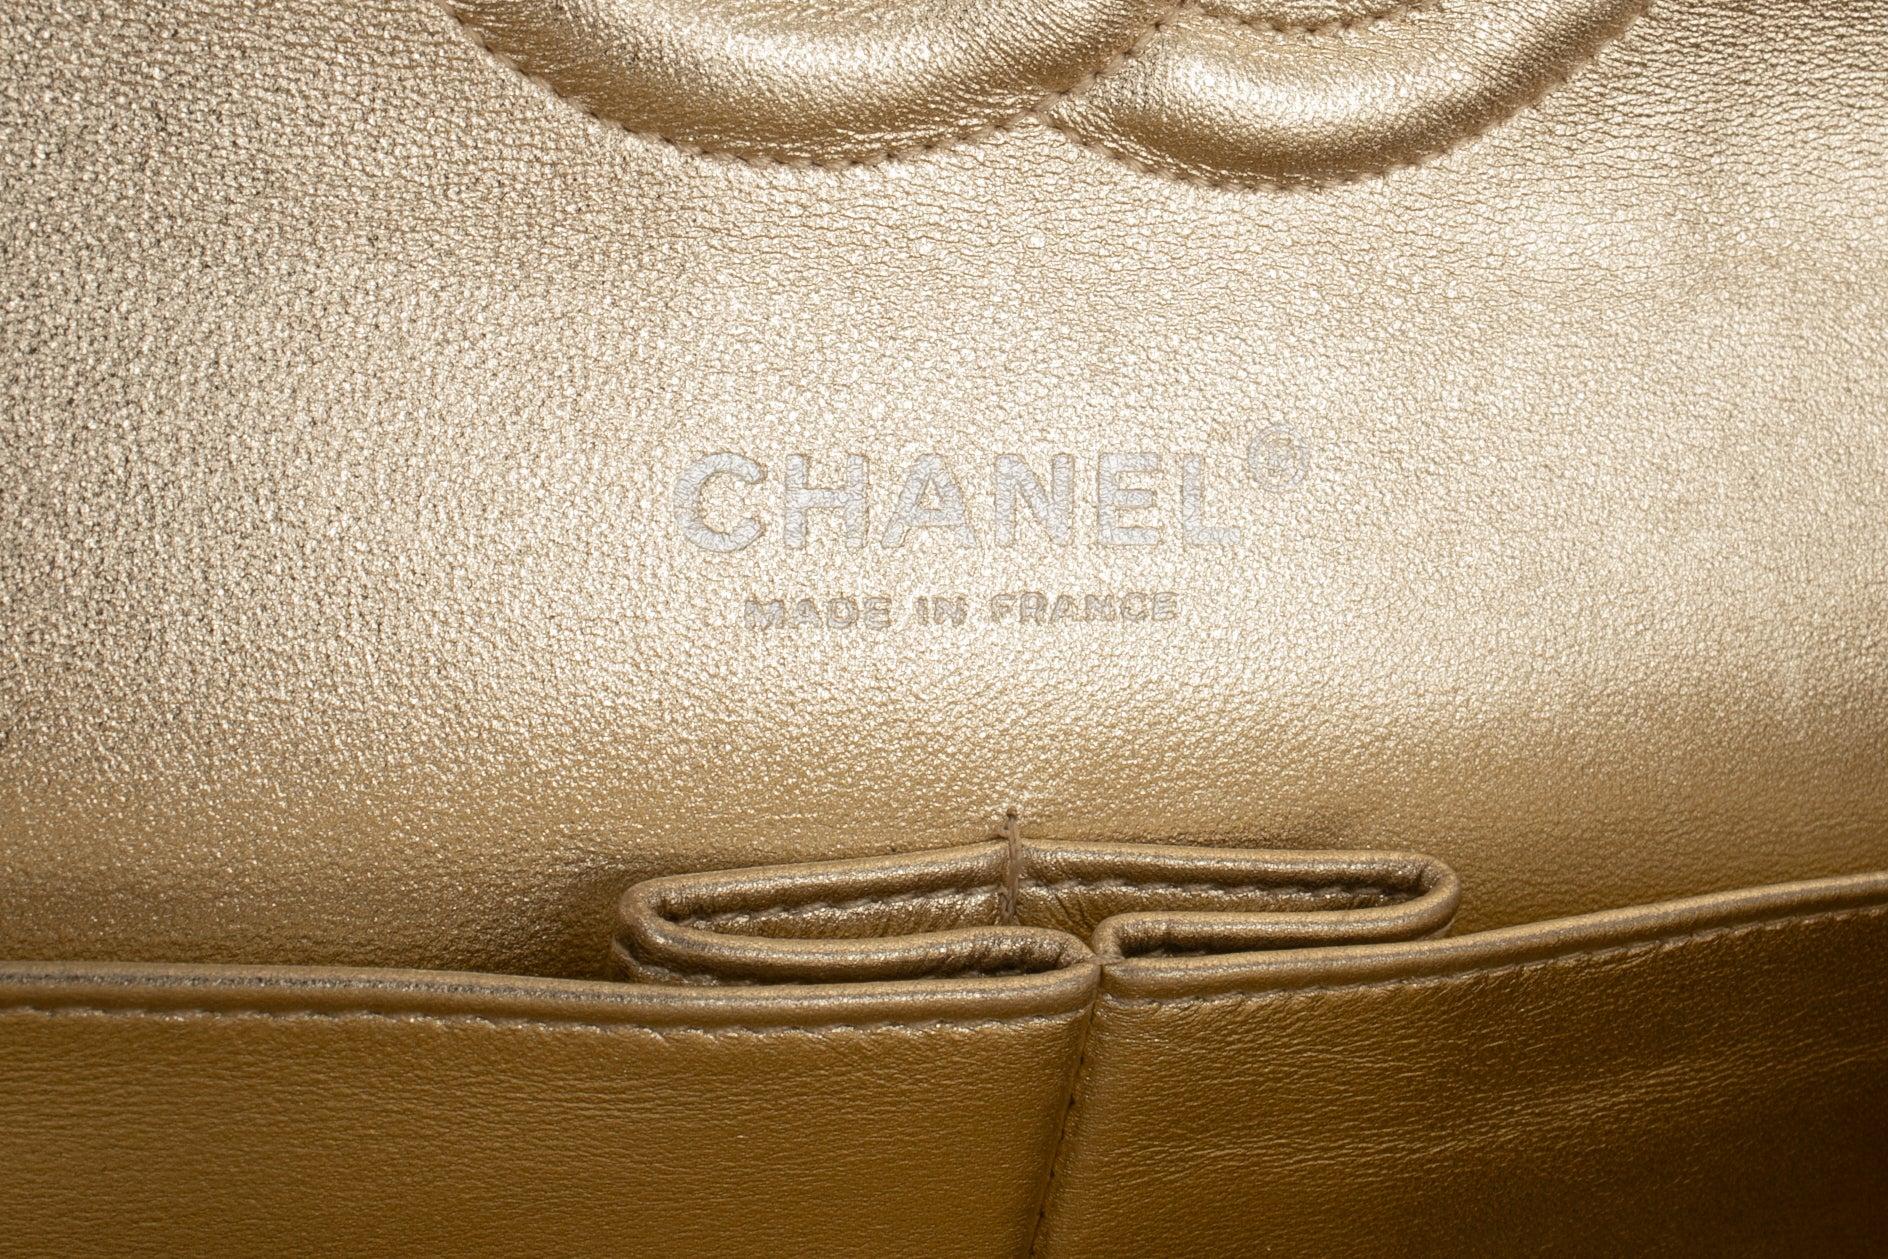 Chanel Timeless Pale-Golden Metallic Lamb Leather Classic Bag, 2006/2008 For Sale 6